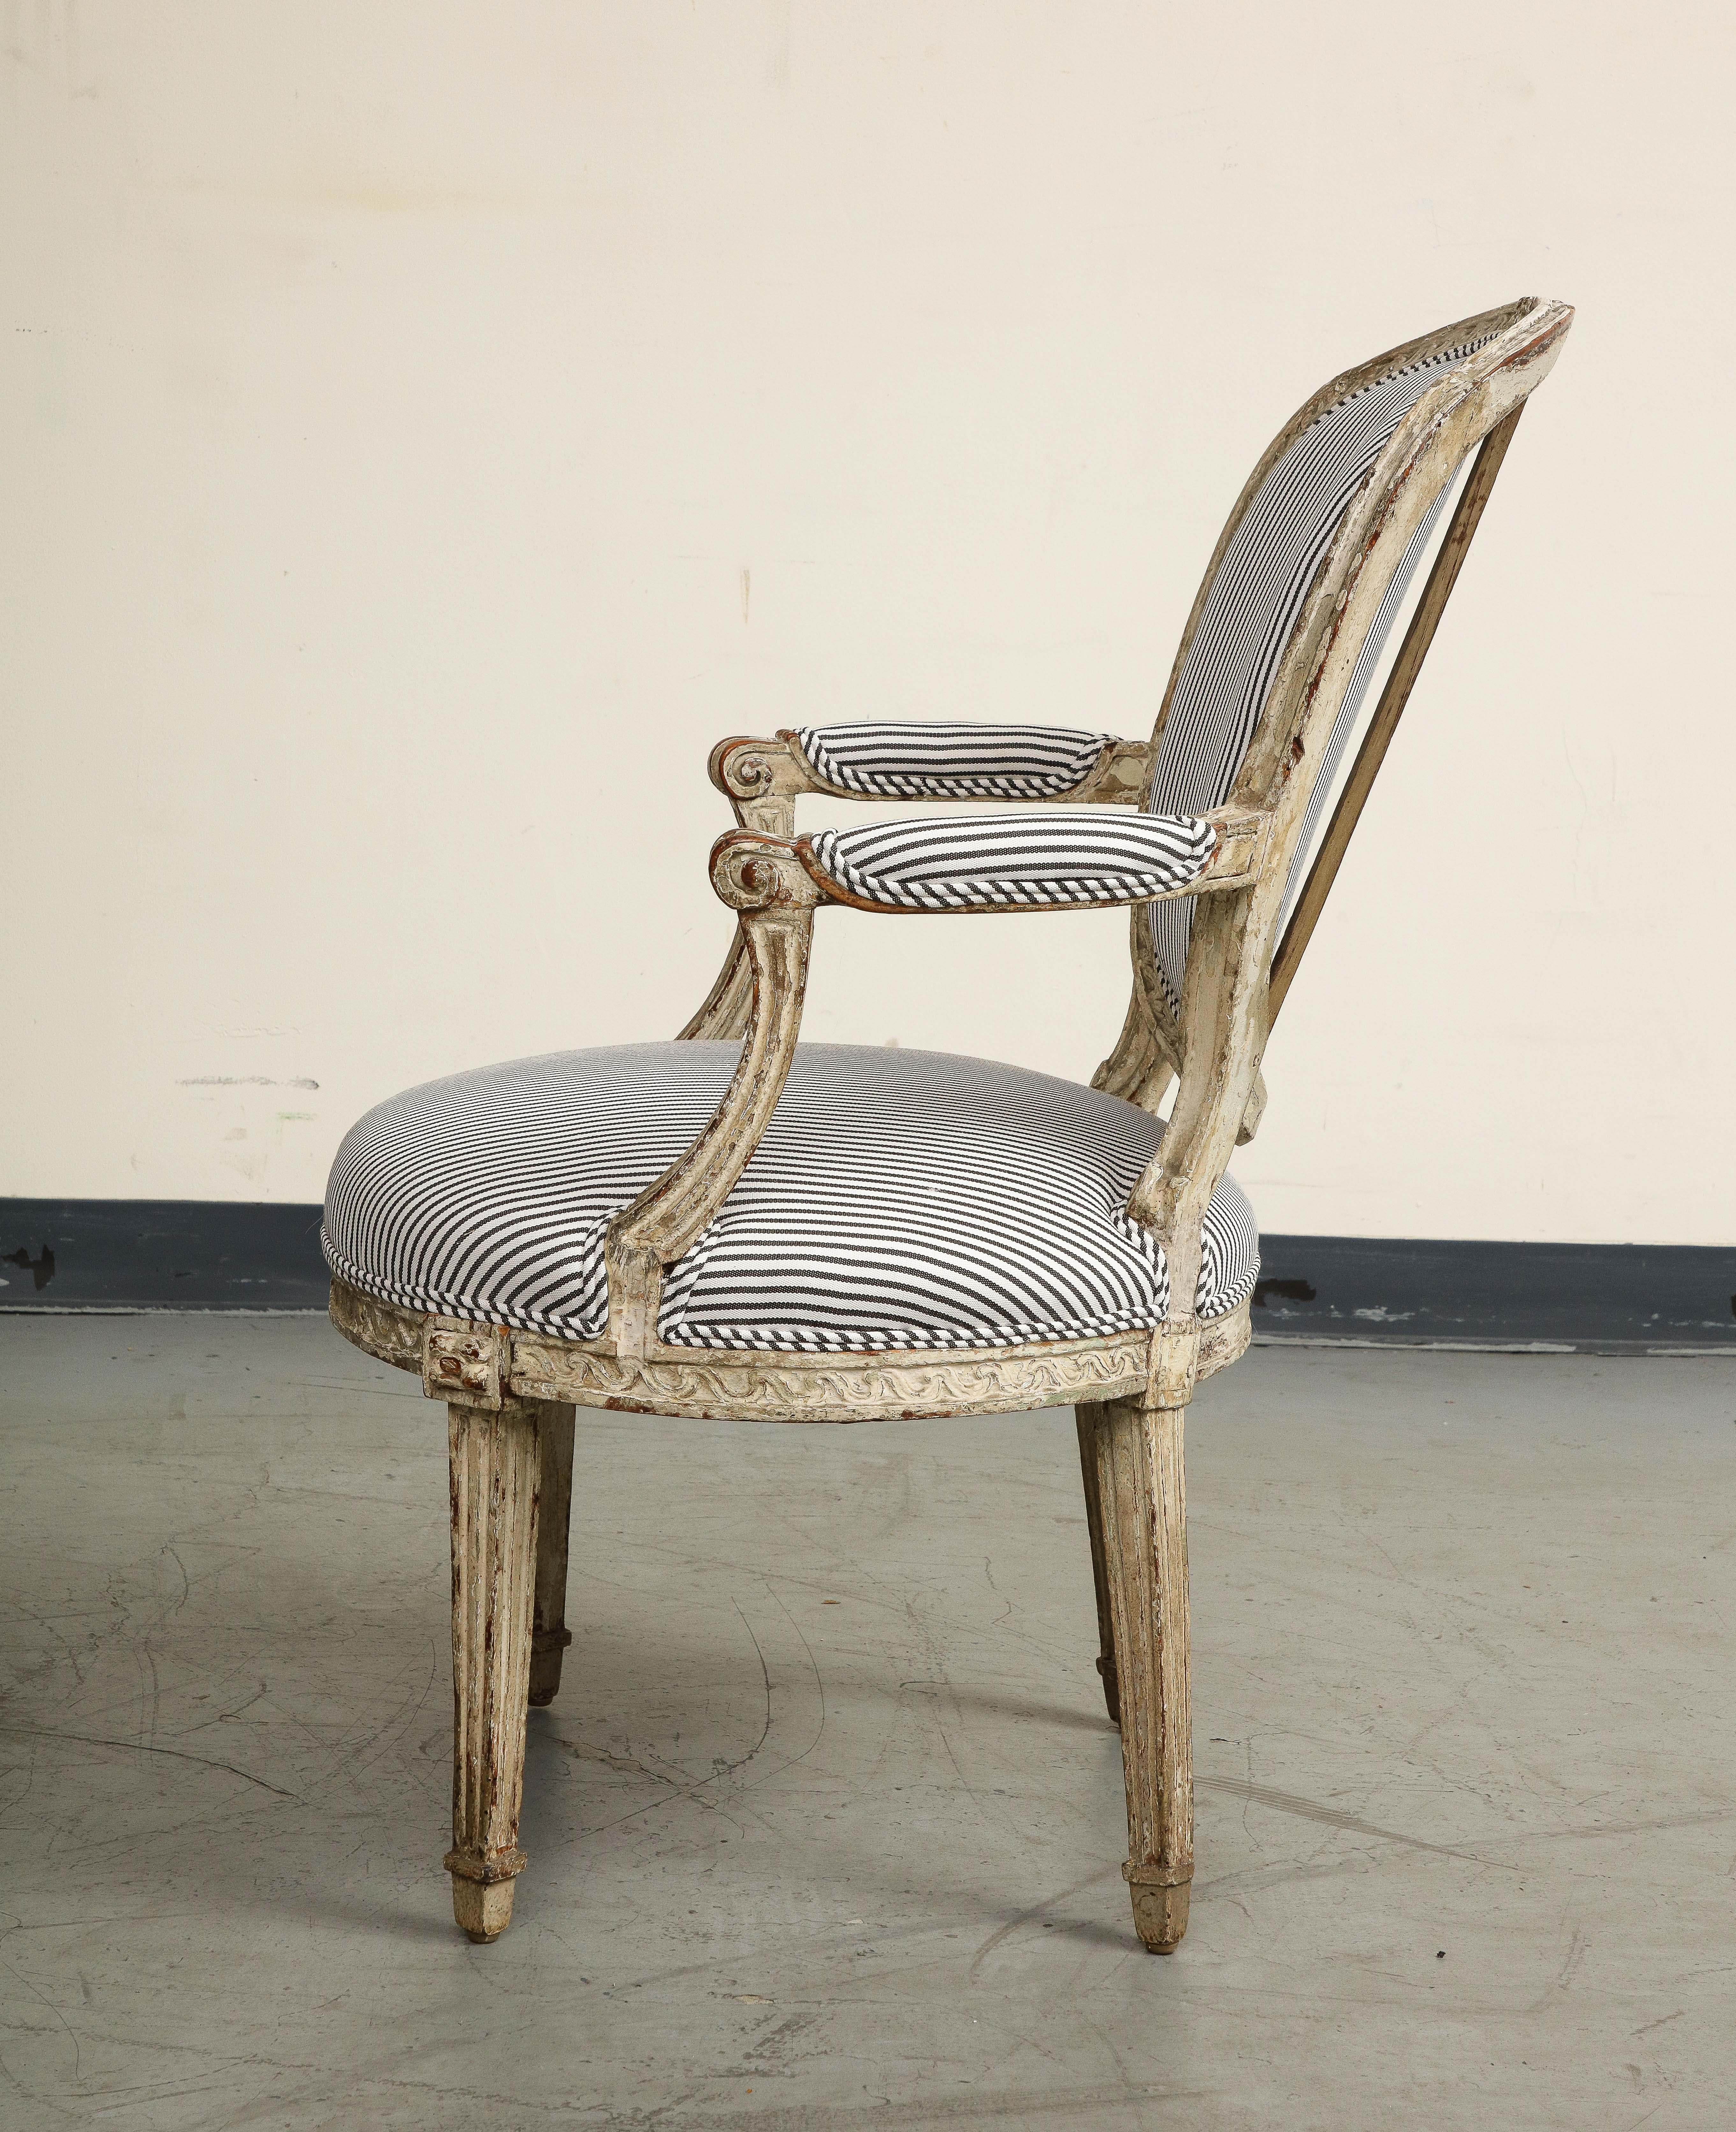 19th Century French Louis XVI Style Fauteuil Chair in Striped Linen Upholstery For Sale 3